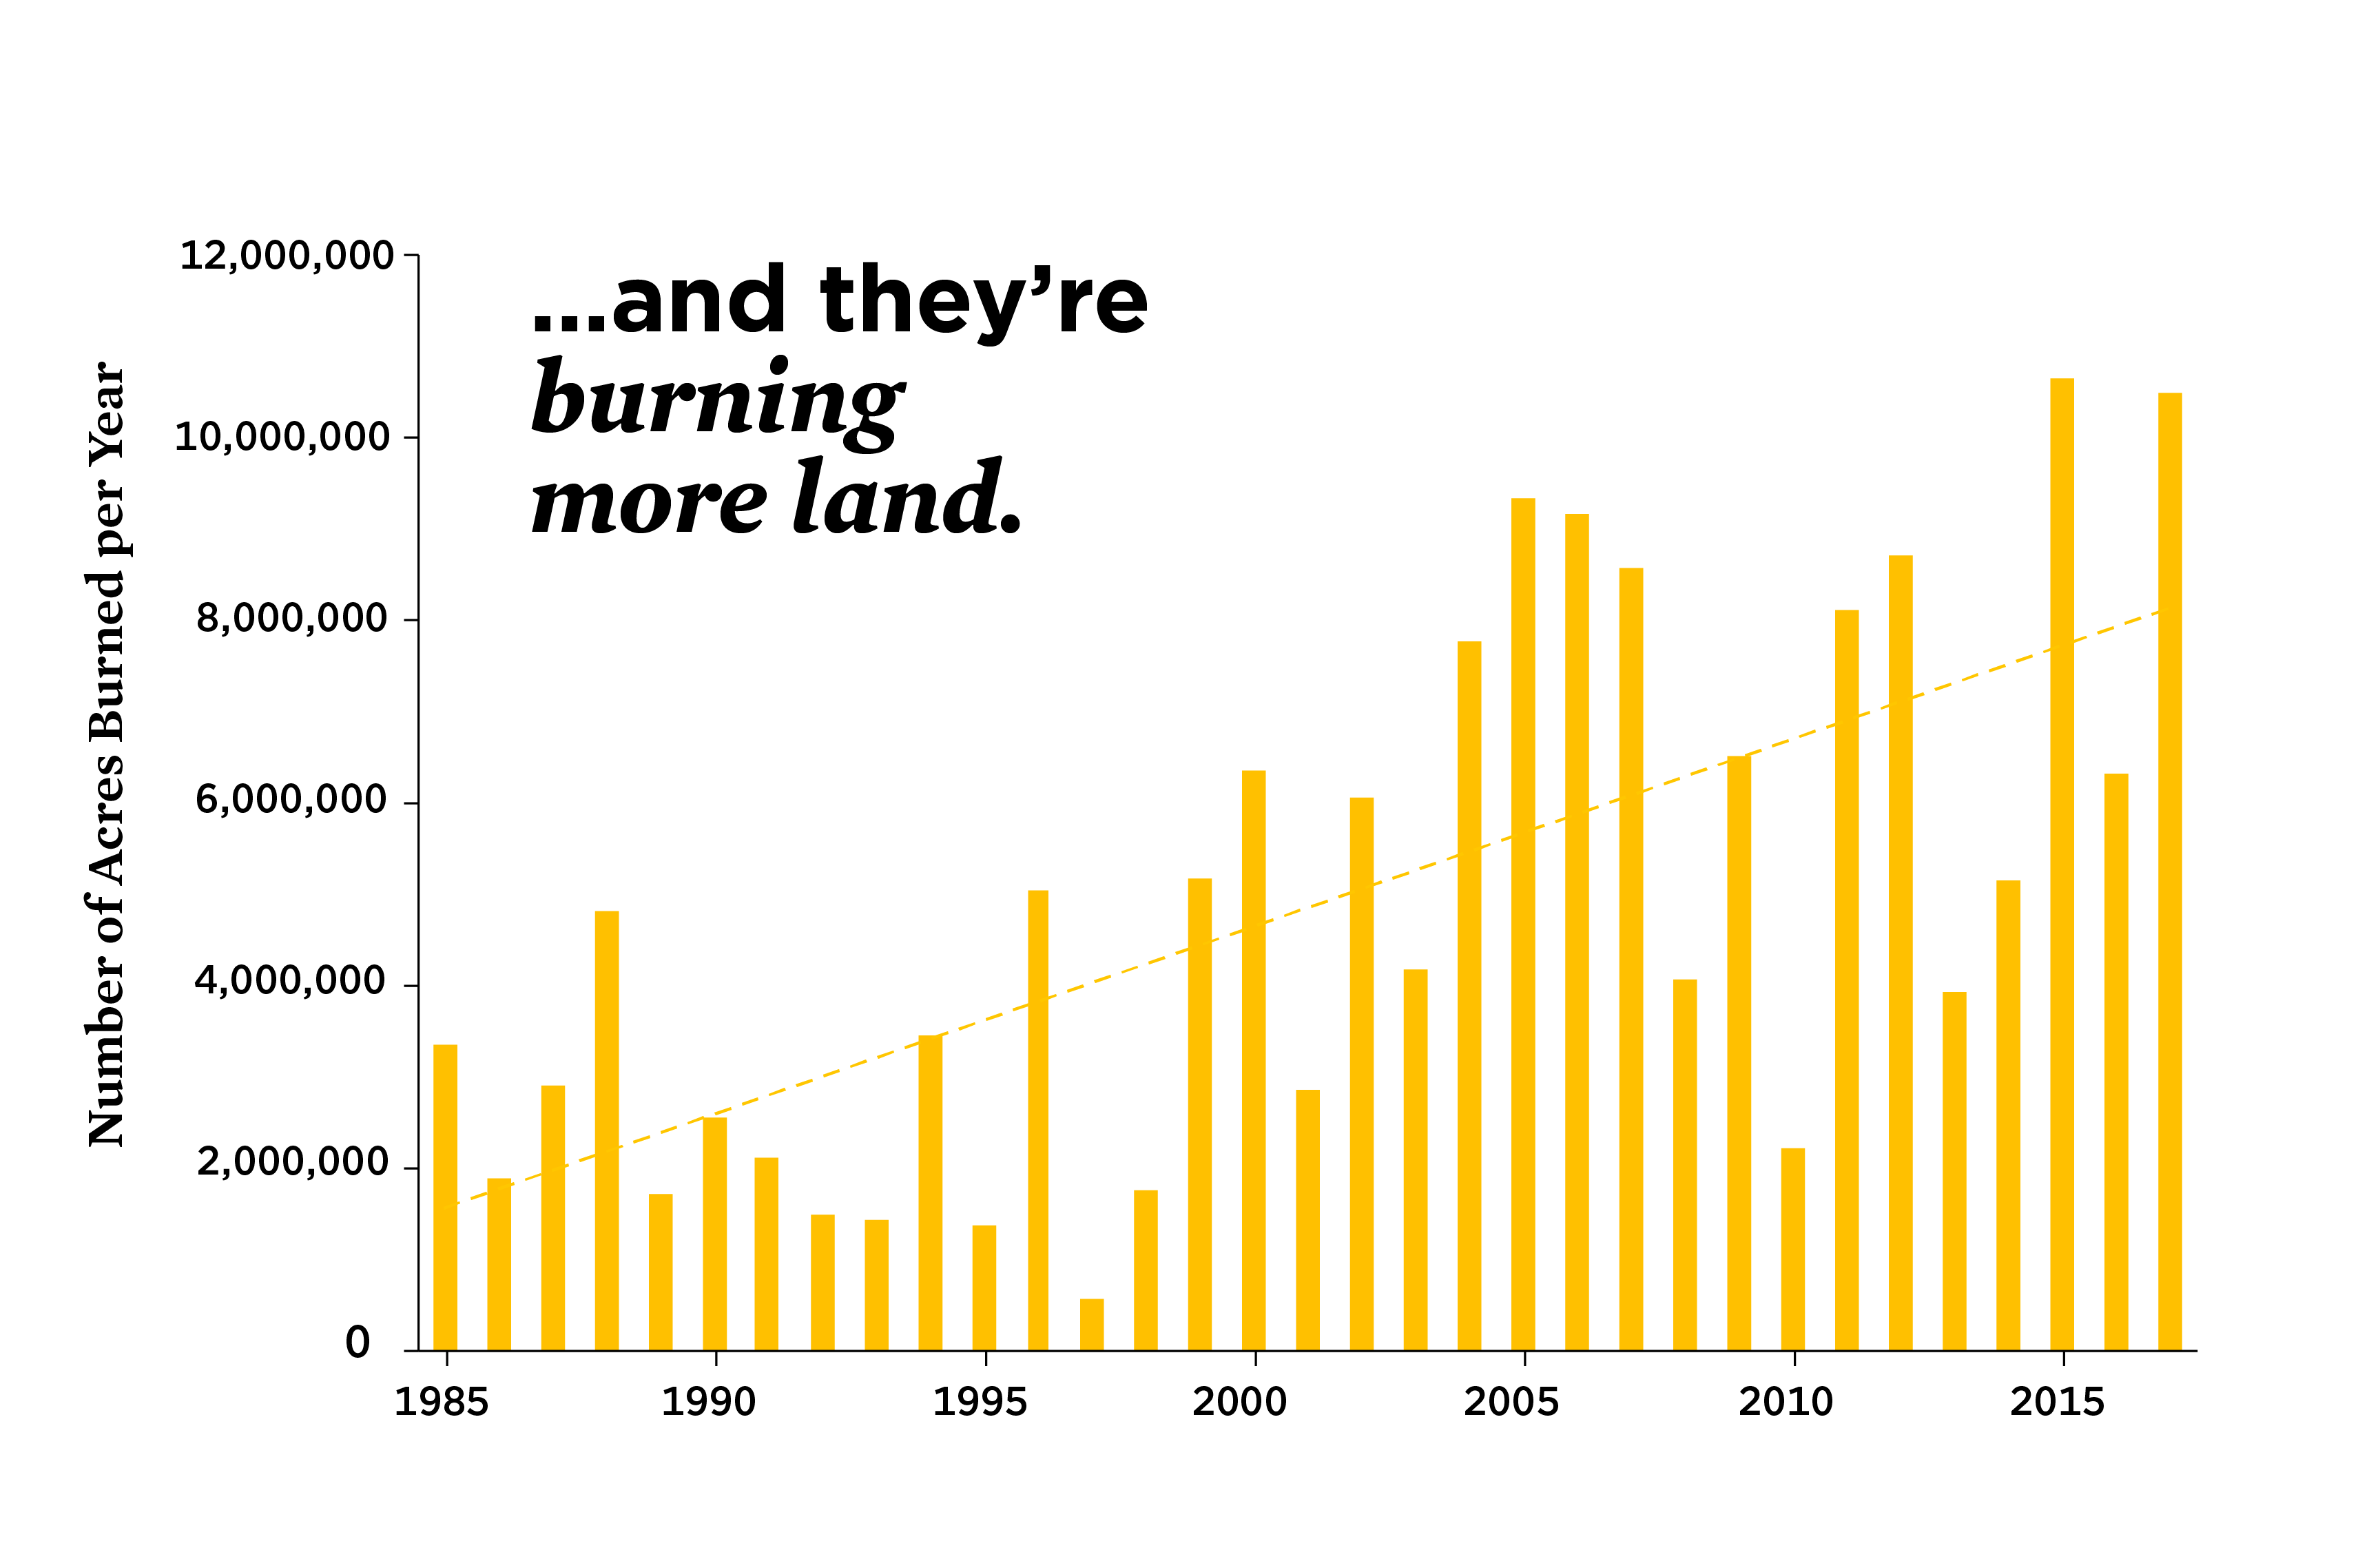 A bar chart showing acreage burned by wildfires